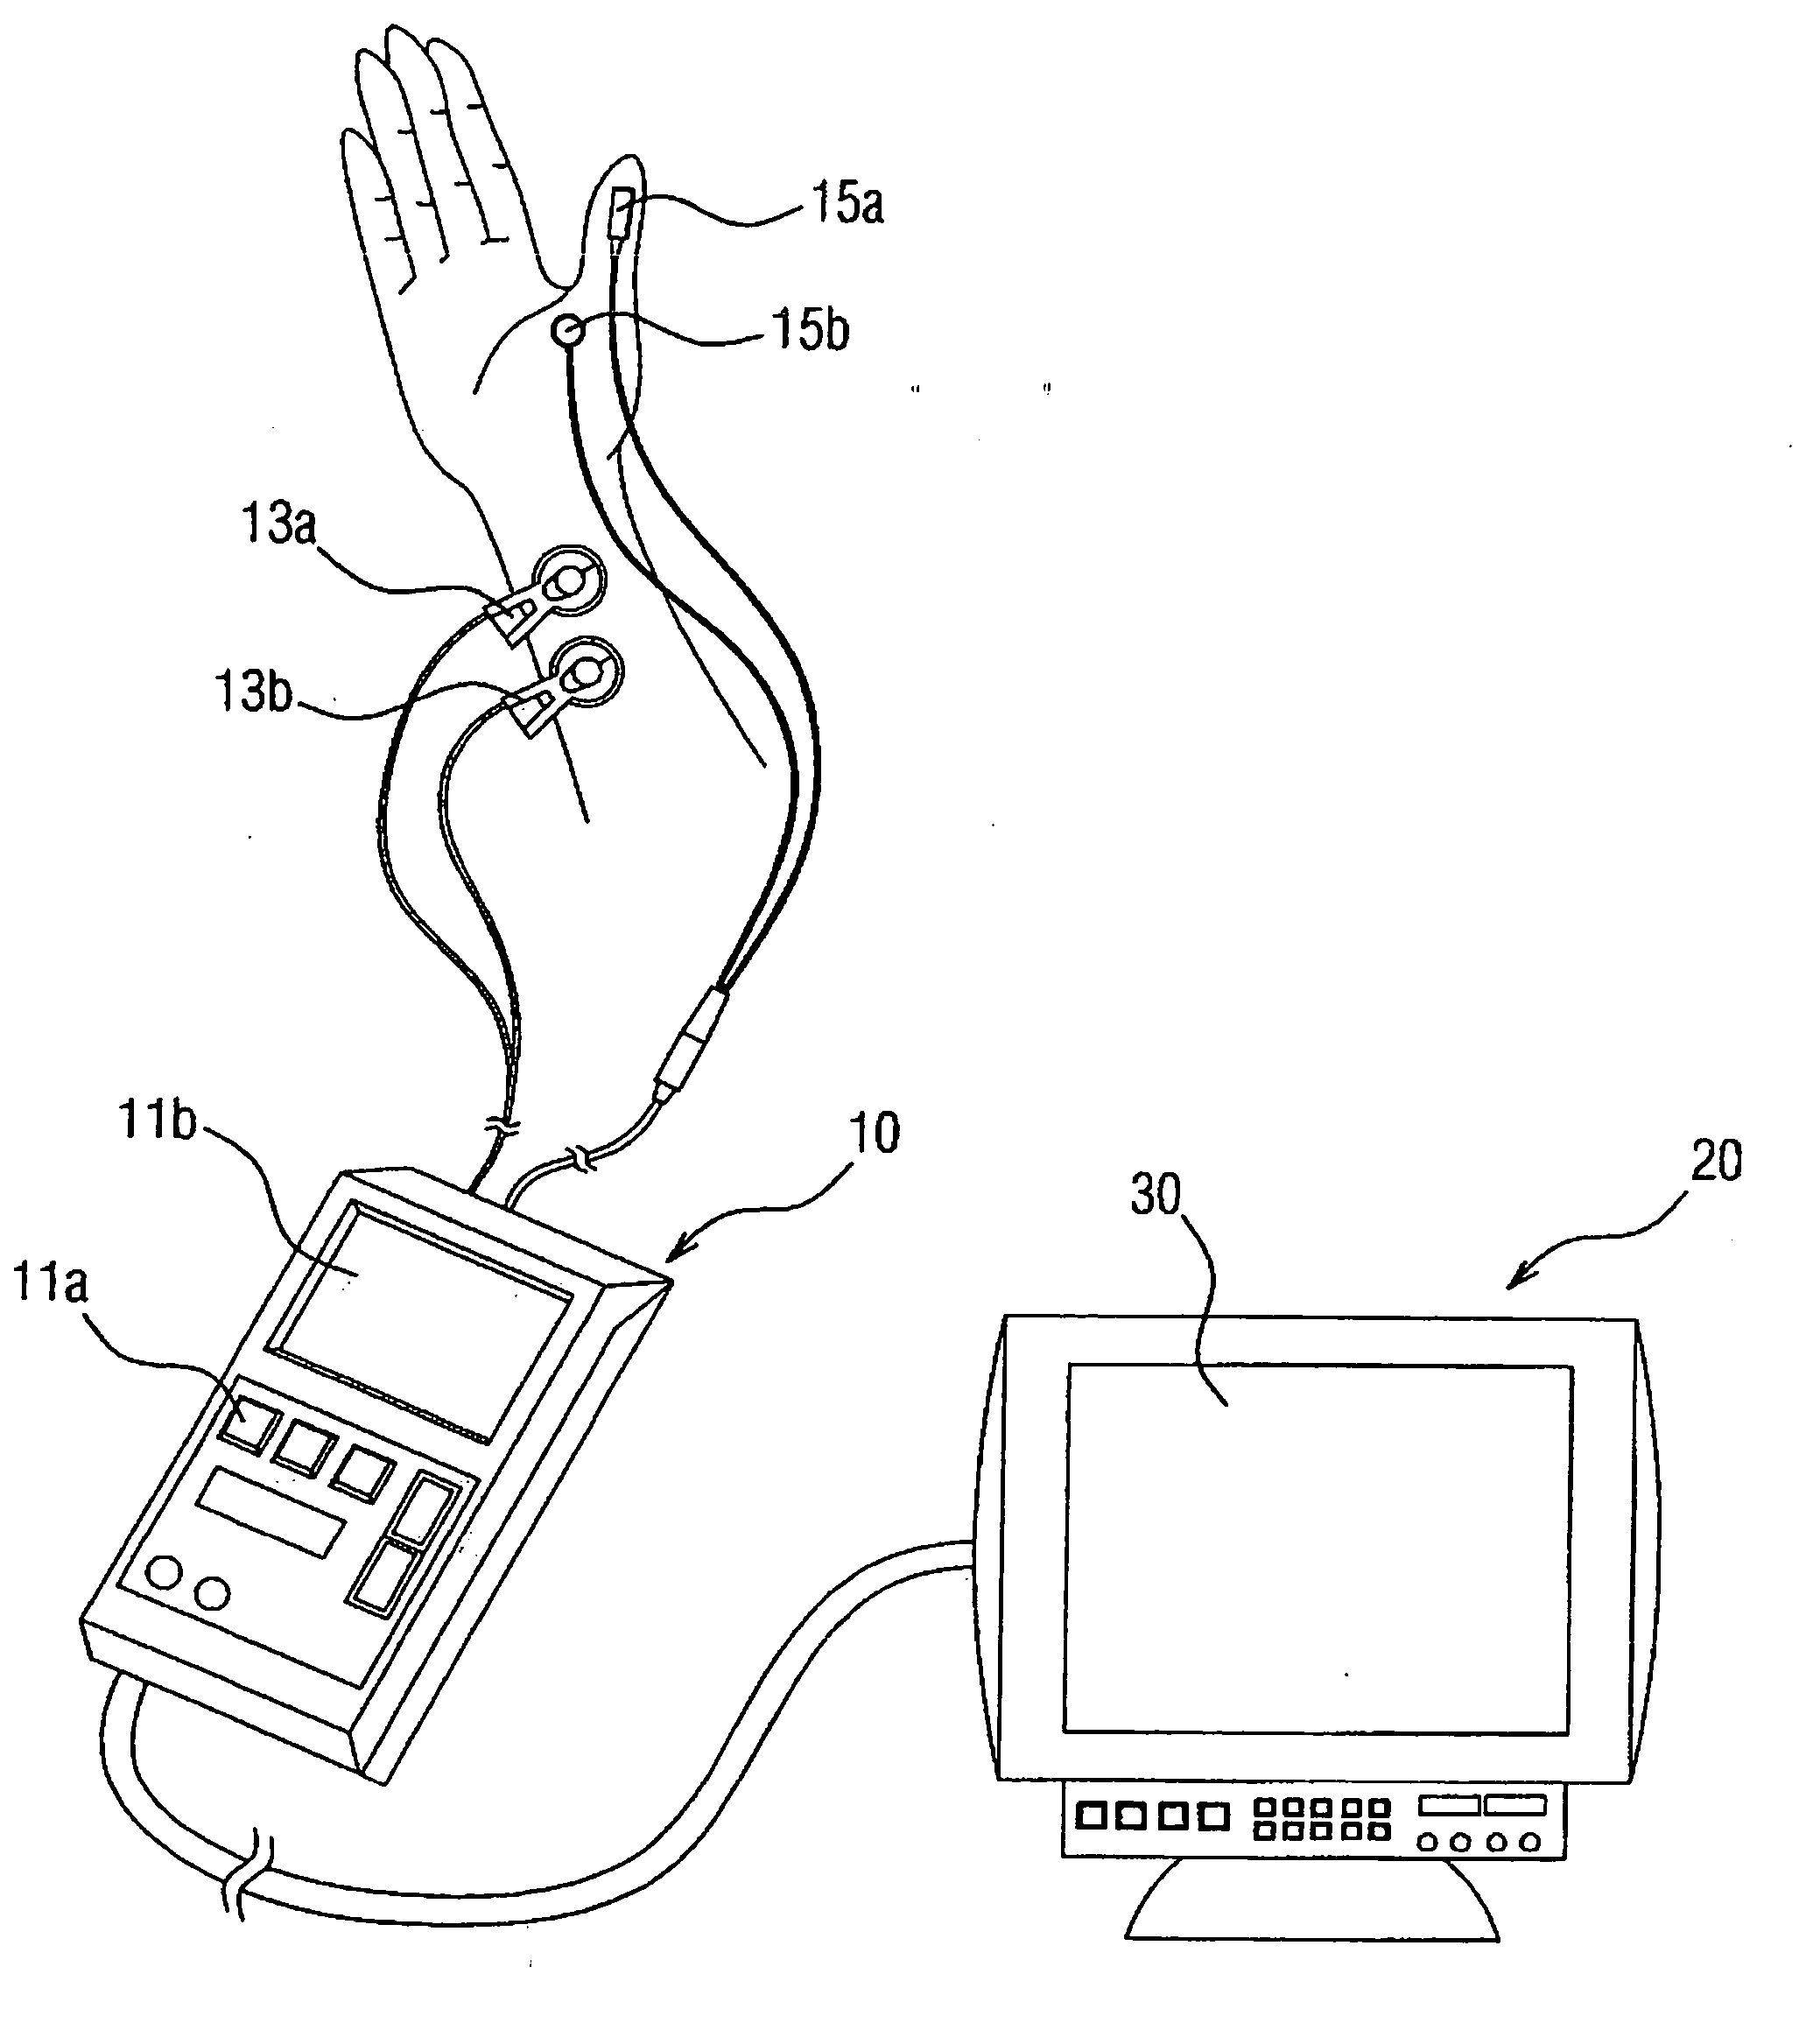 Method and monitor apparatus for displaying parameters indicative of muscle relaxation